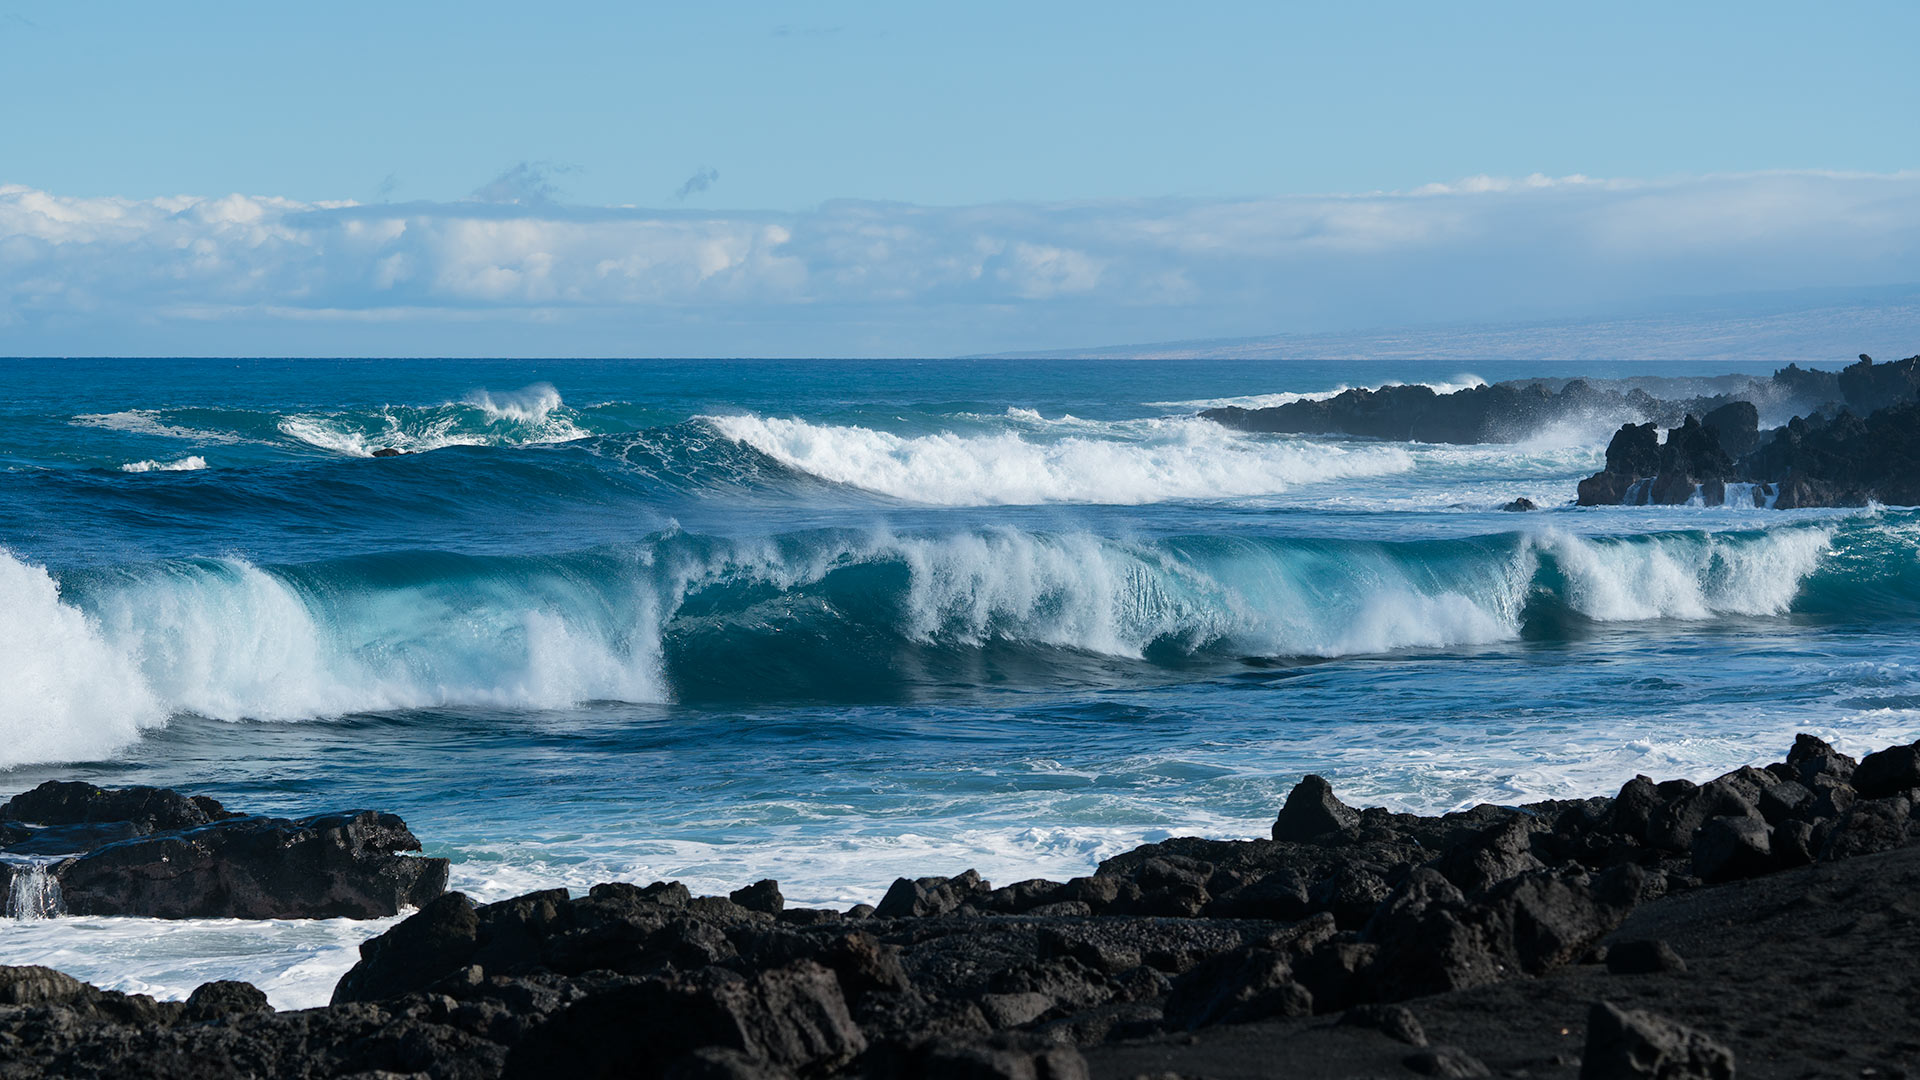 The shoreline’s raw waves are an endless source of fascination